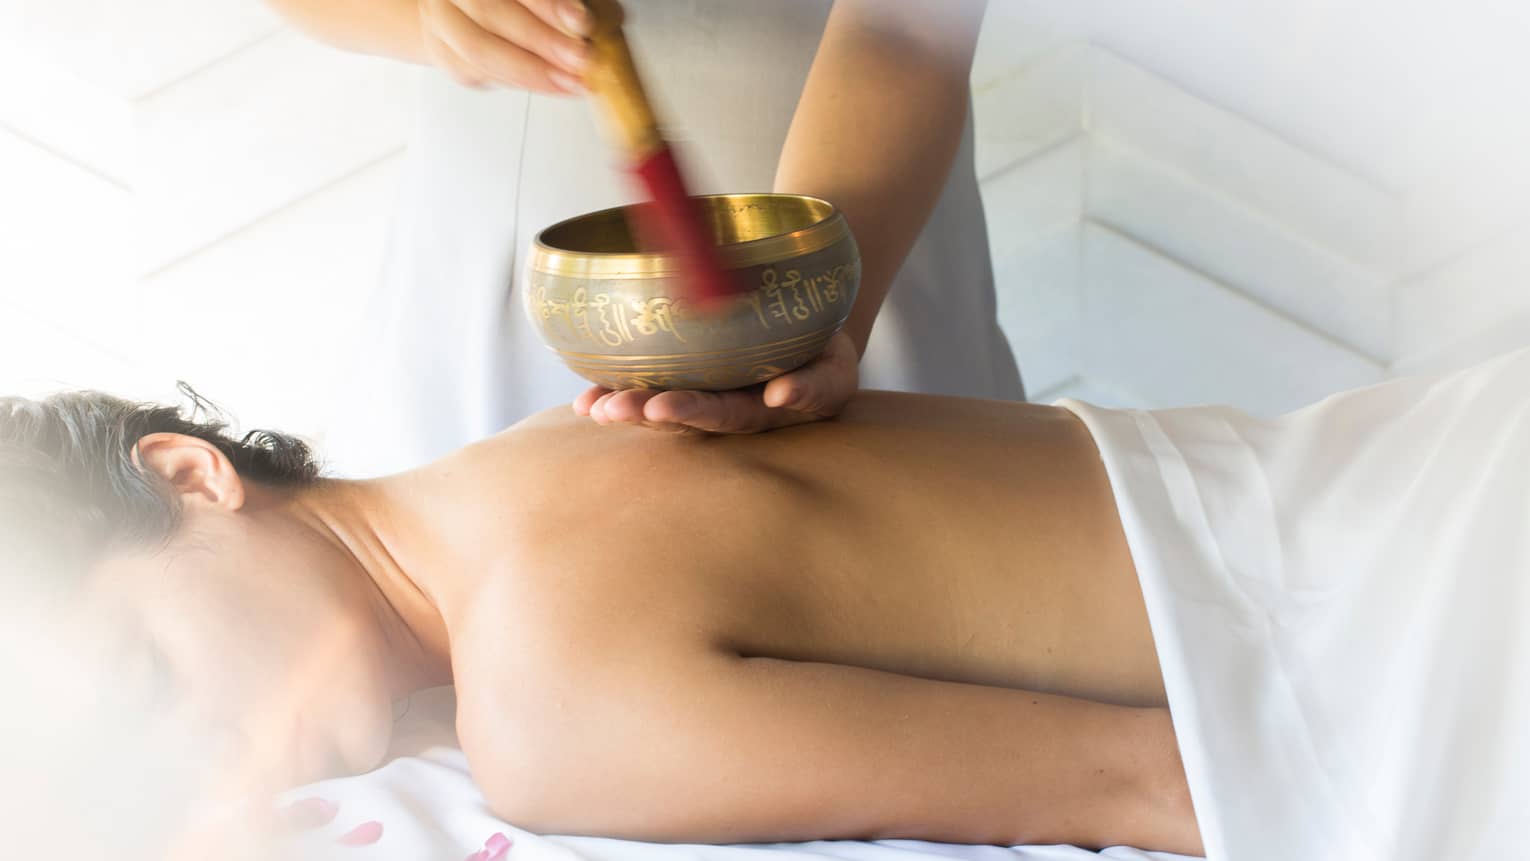 Hands play brass singing bowl over bare back of woman lying on massage table